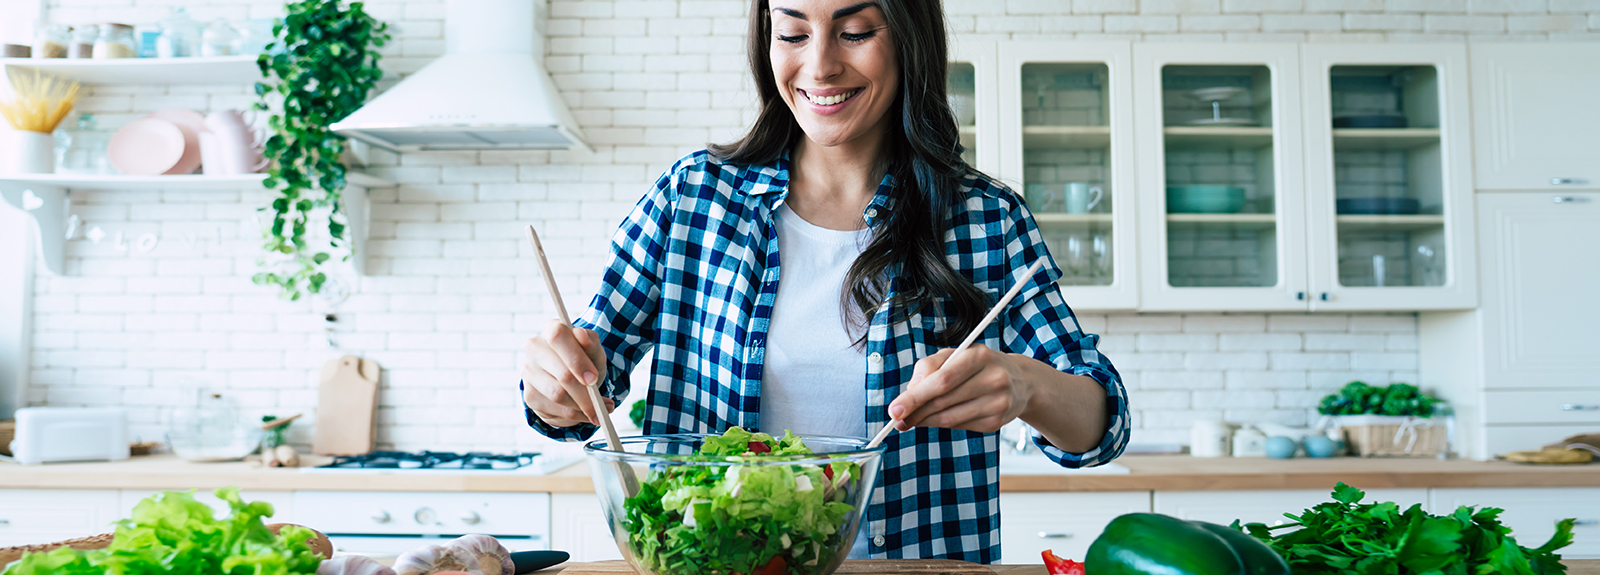 Smiling woman tosses fresh green salad in a bright kitchen.